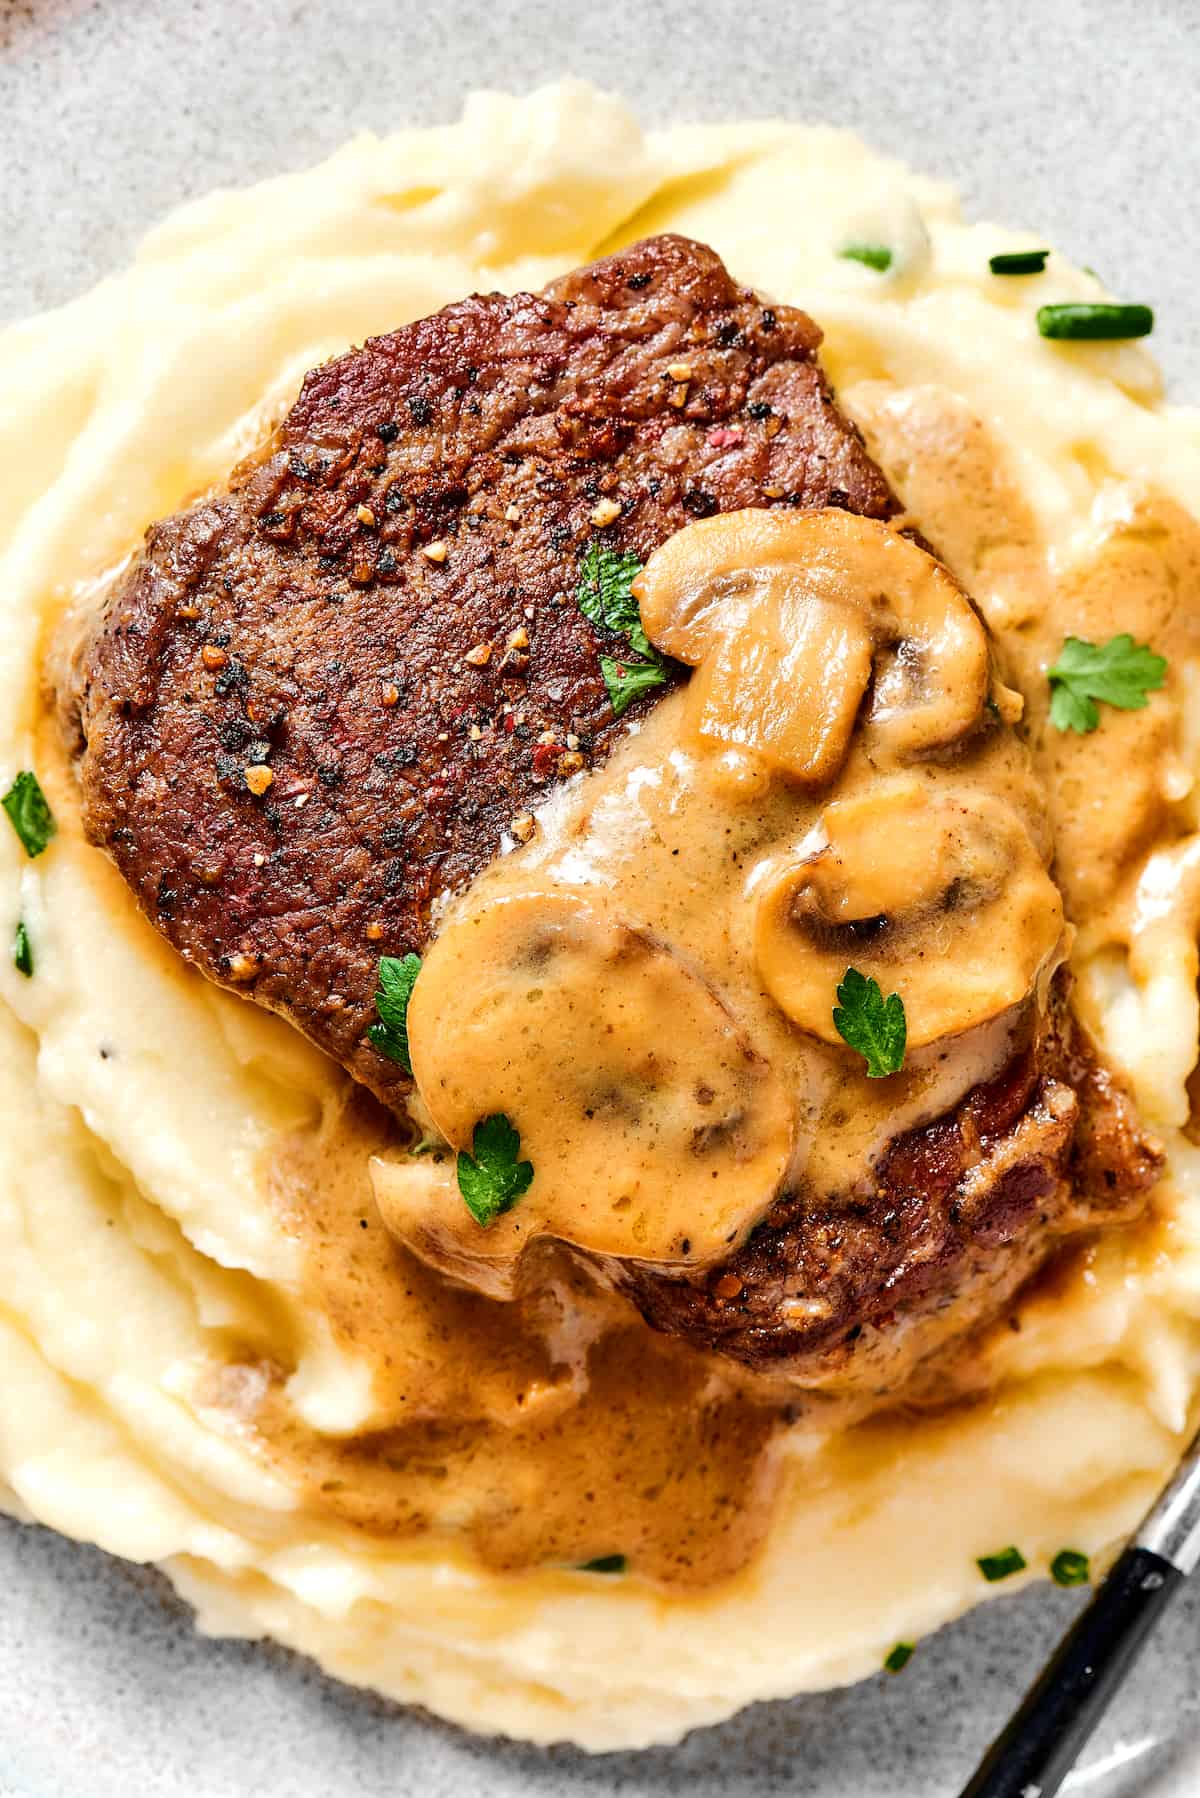 Overhead view of Steak diane over buttermilk mashed potatoes